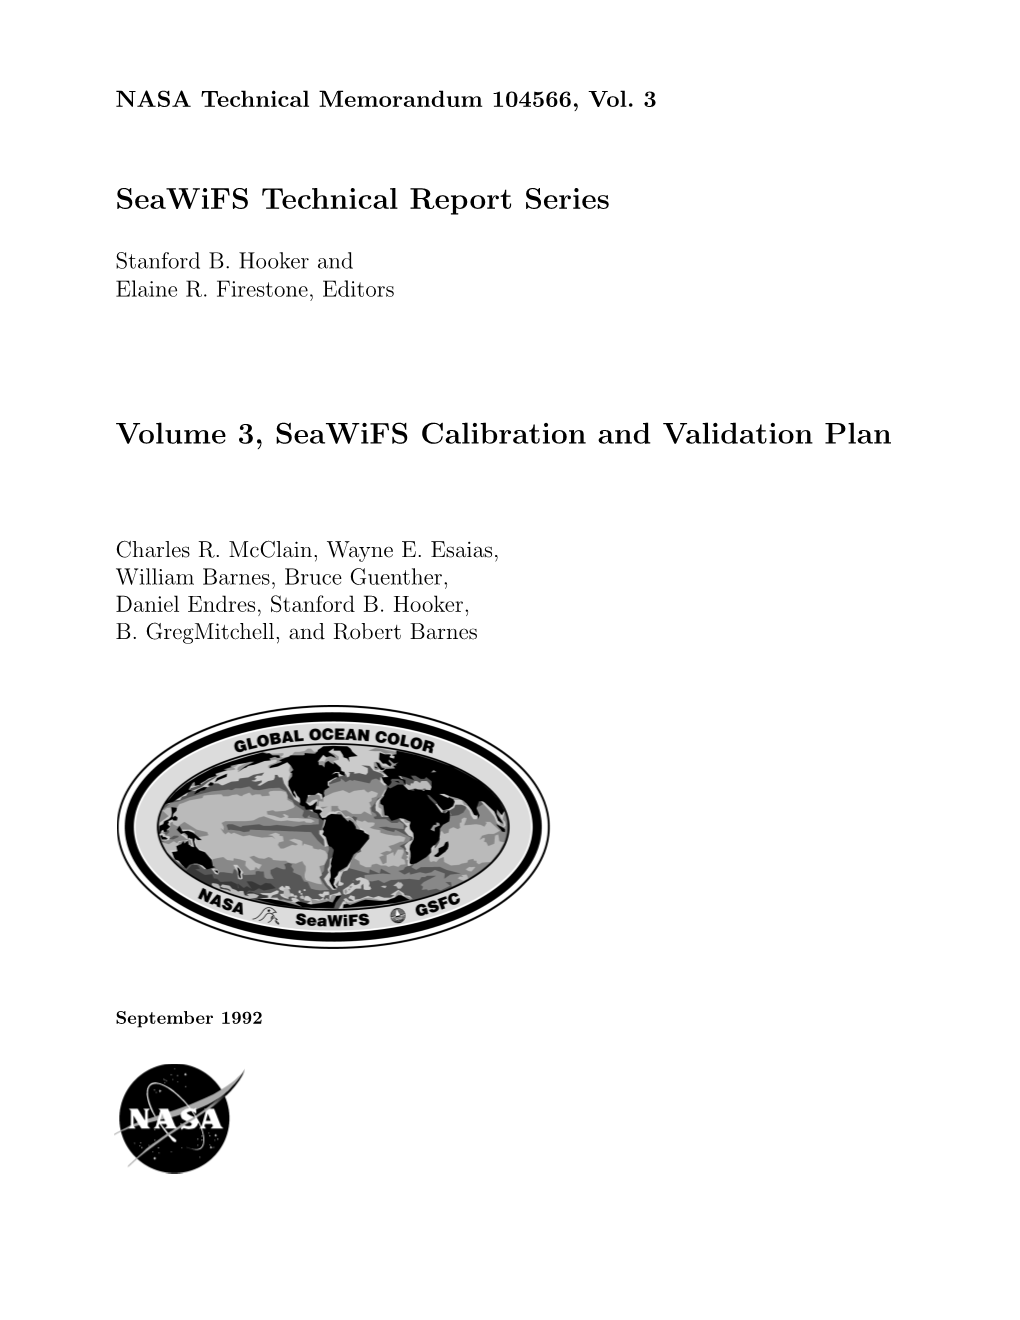 Seawifs Technical Report Series Volume 3–Seawifs Calibration and Validation Plan Code 970.2